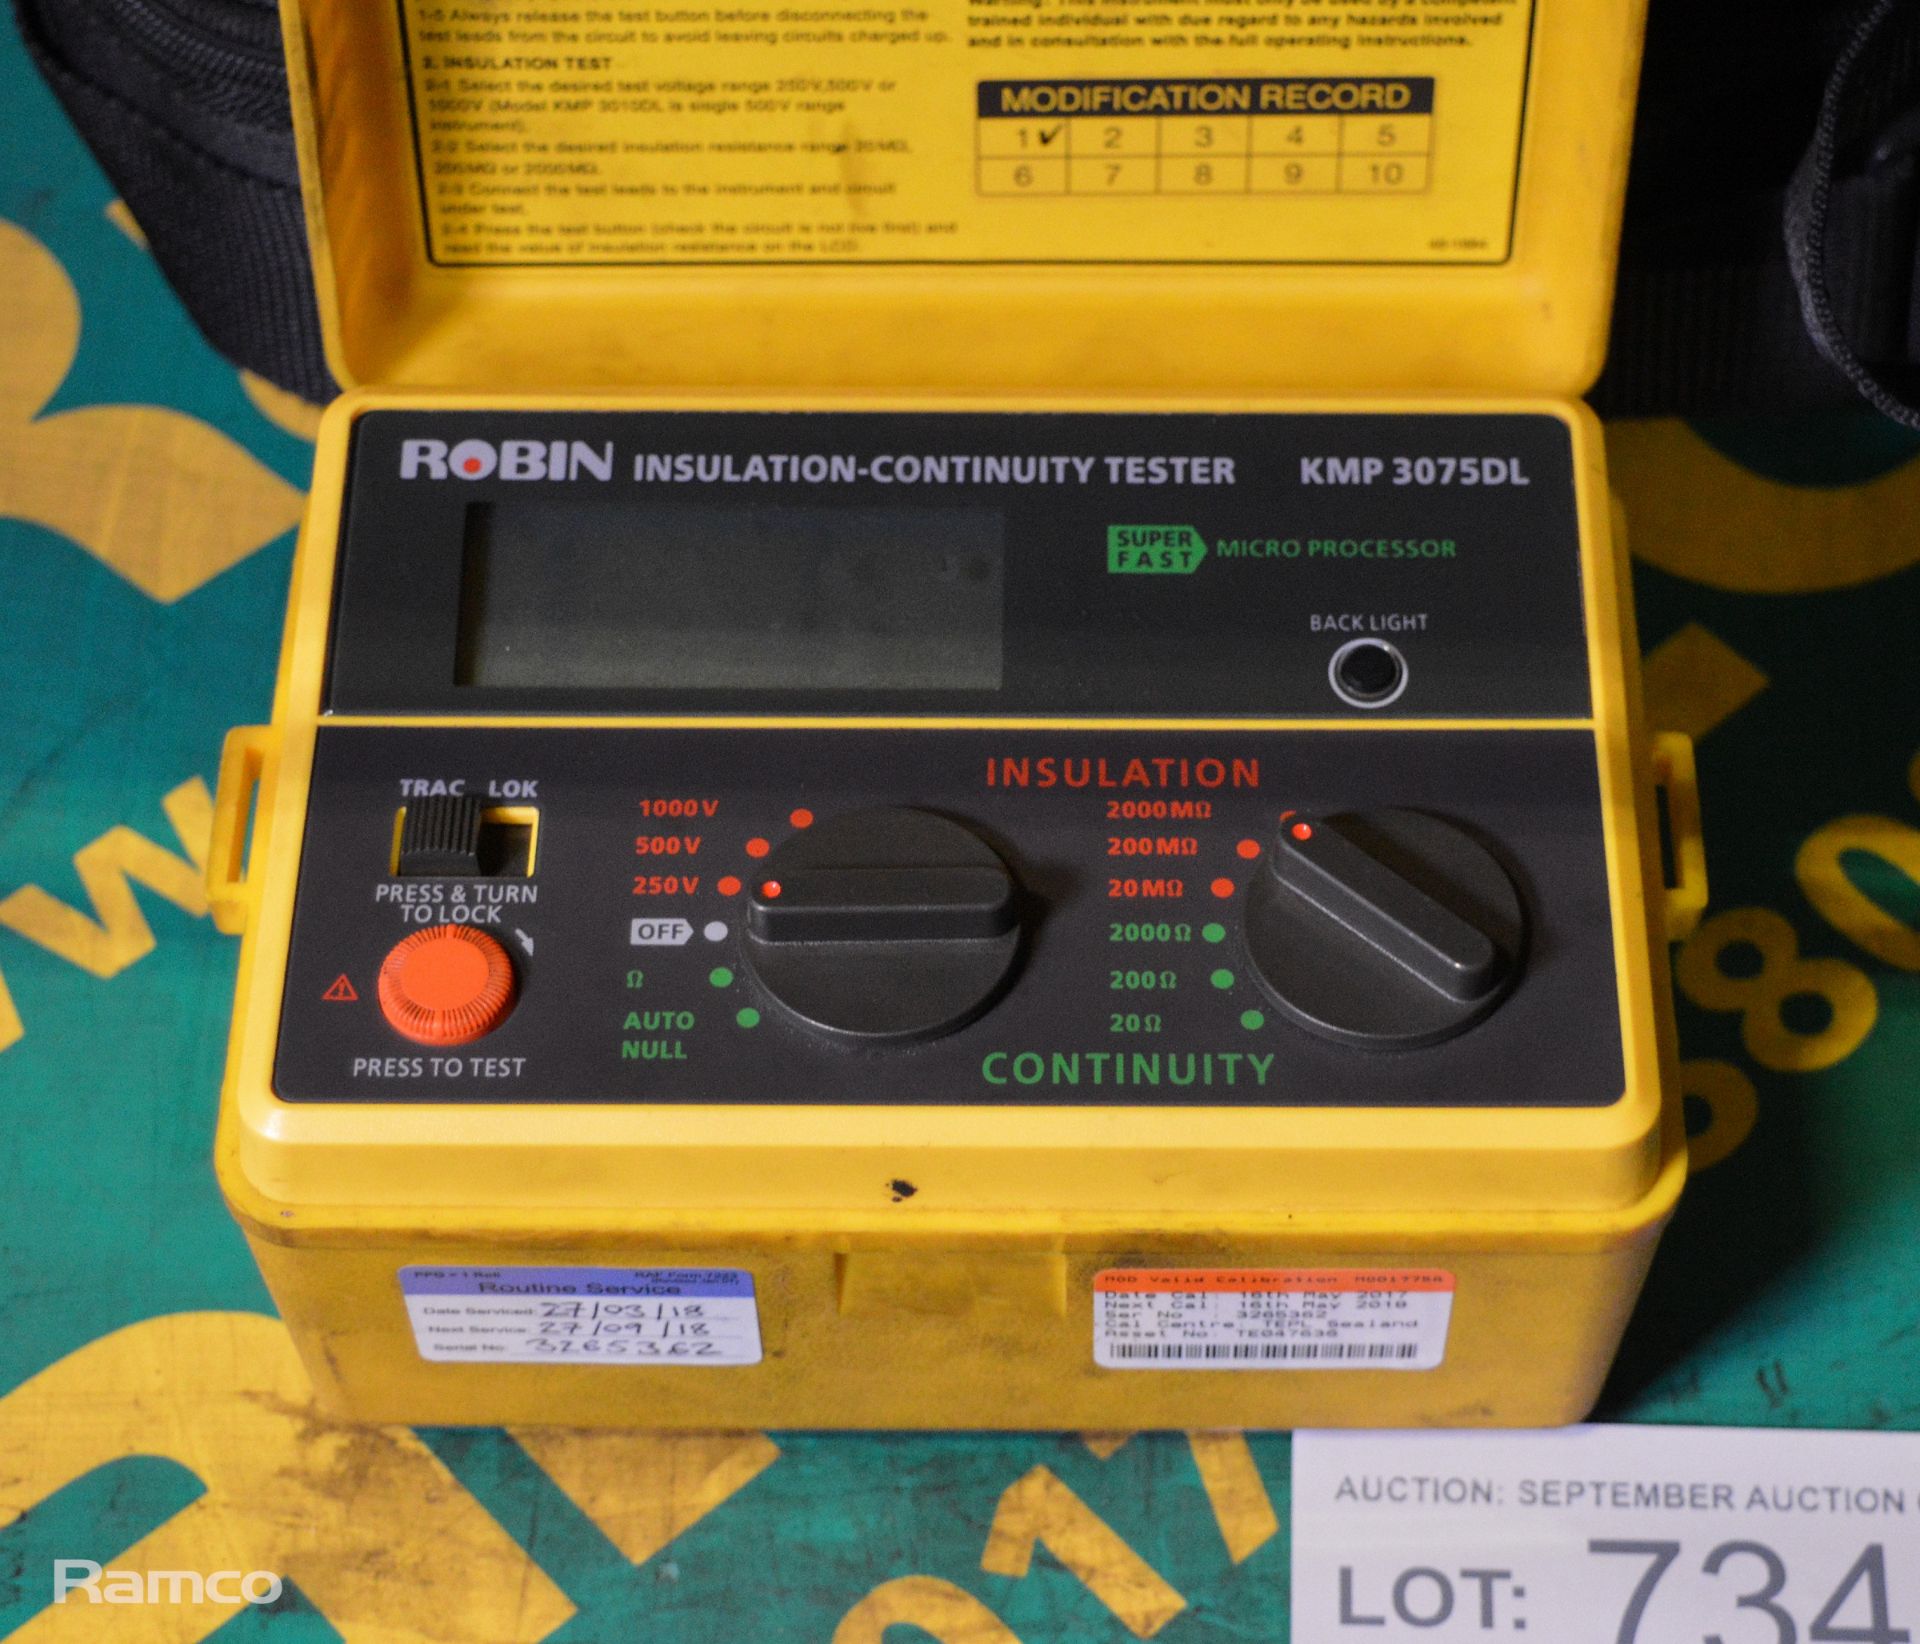 2x Robin KMP 3075DL Digital Insulation Continuity Testers - Image 2 of 2